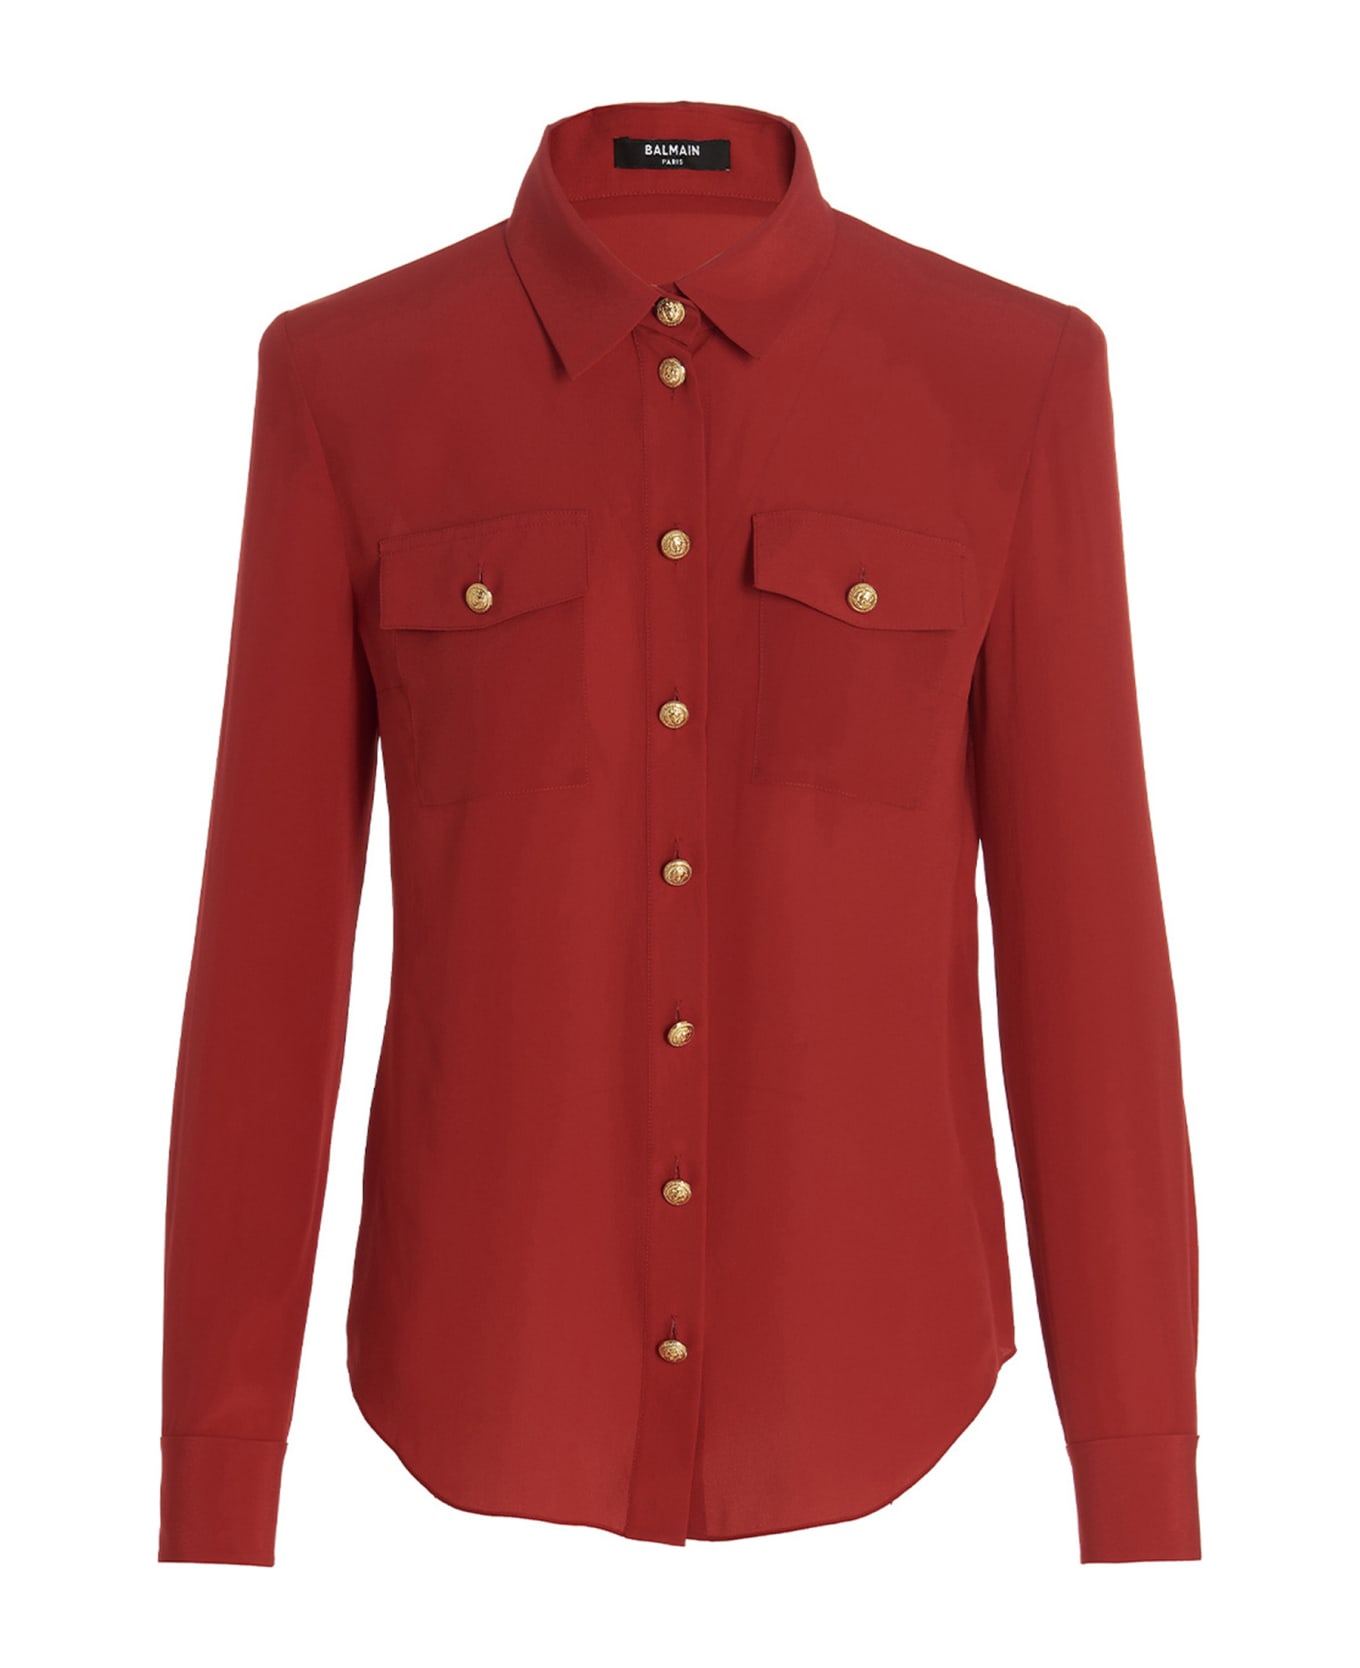 Balmain Silk Shirts With Padded Shoulders - Red